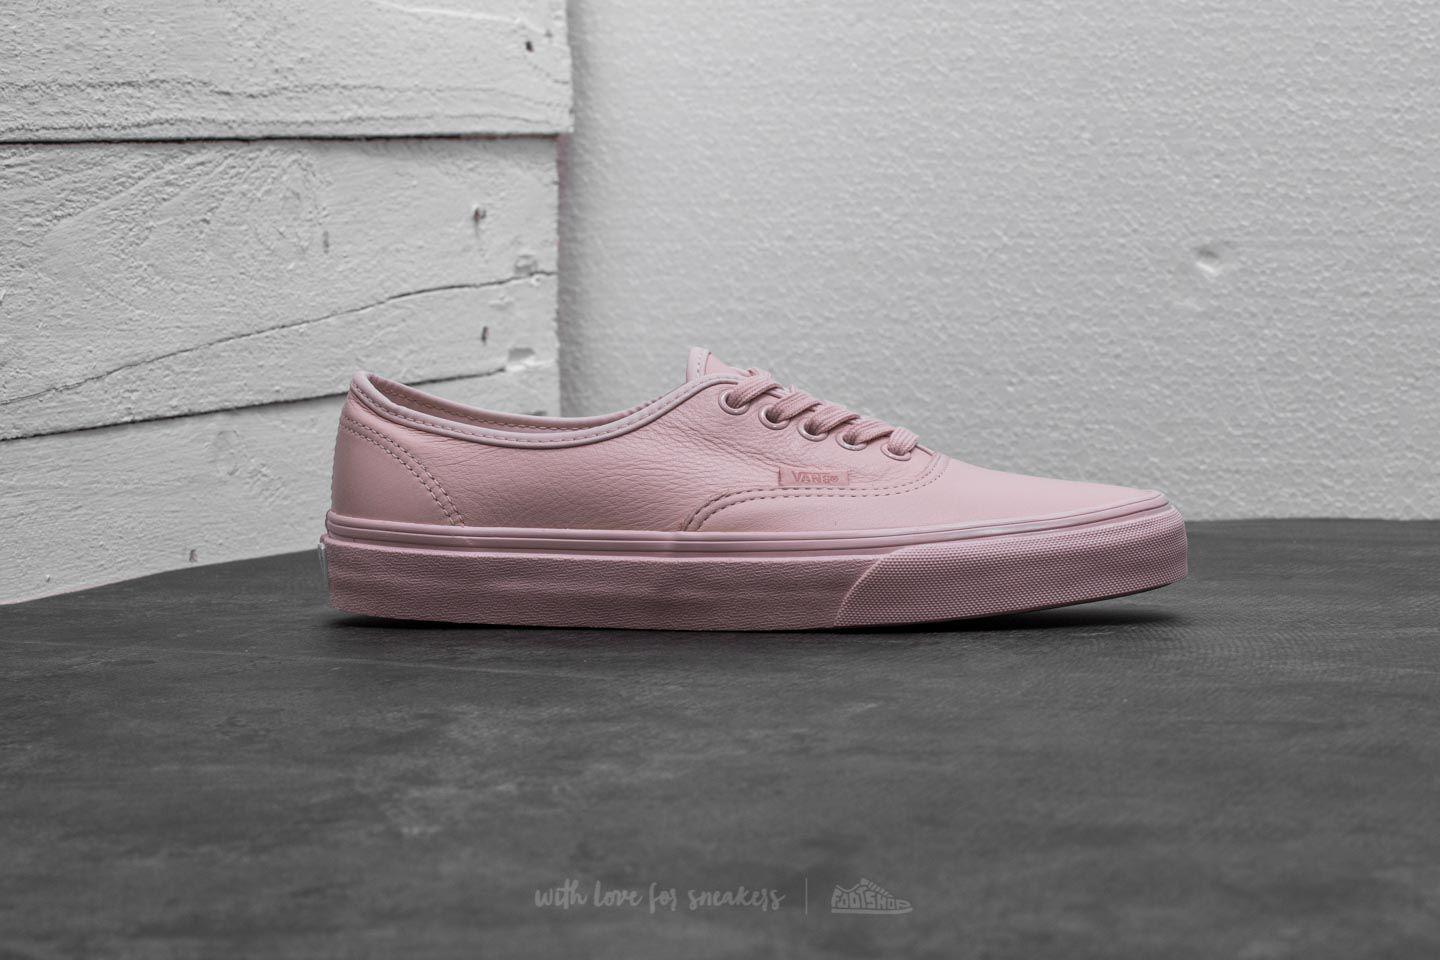 vans authentic leather trainers sepia rose mono